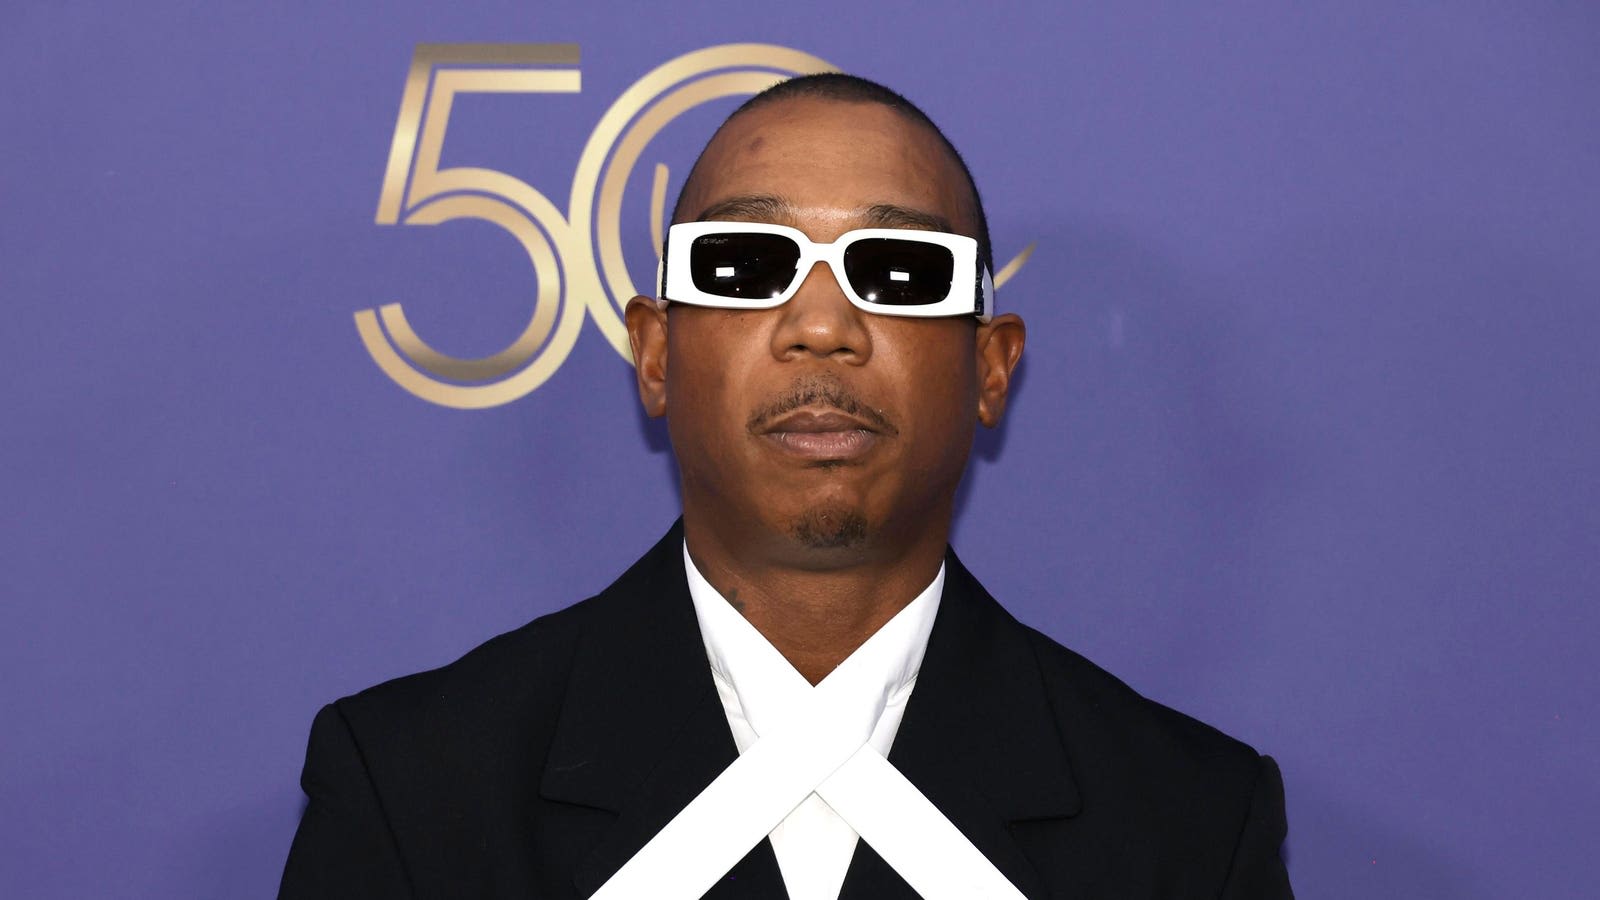 Did Ja Rule Jinx The Knicks? Here’s Why Some Fans Think So After Playoffs Loss